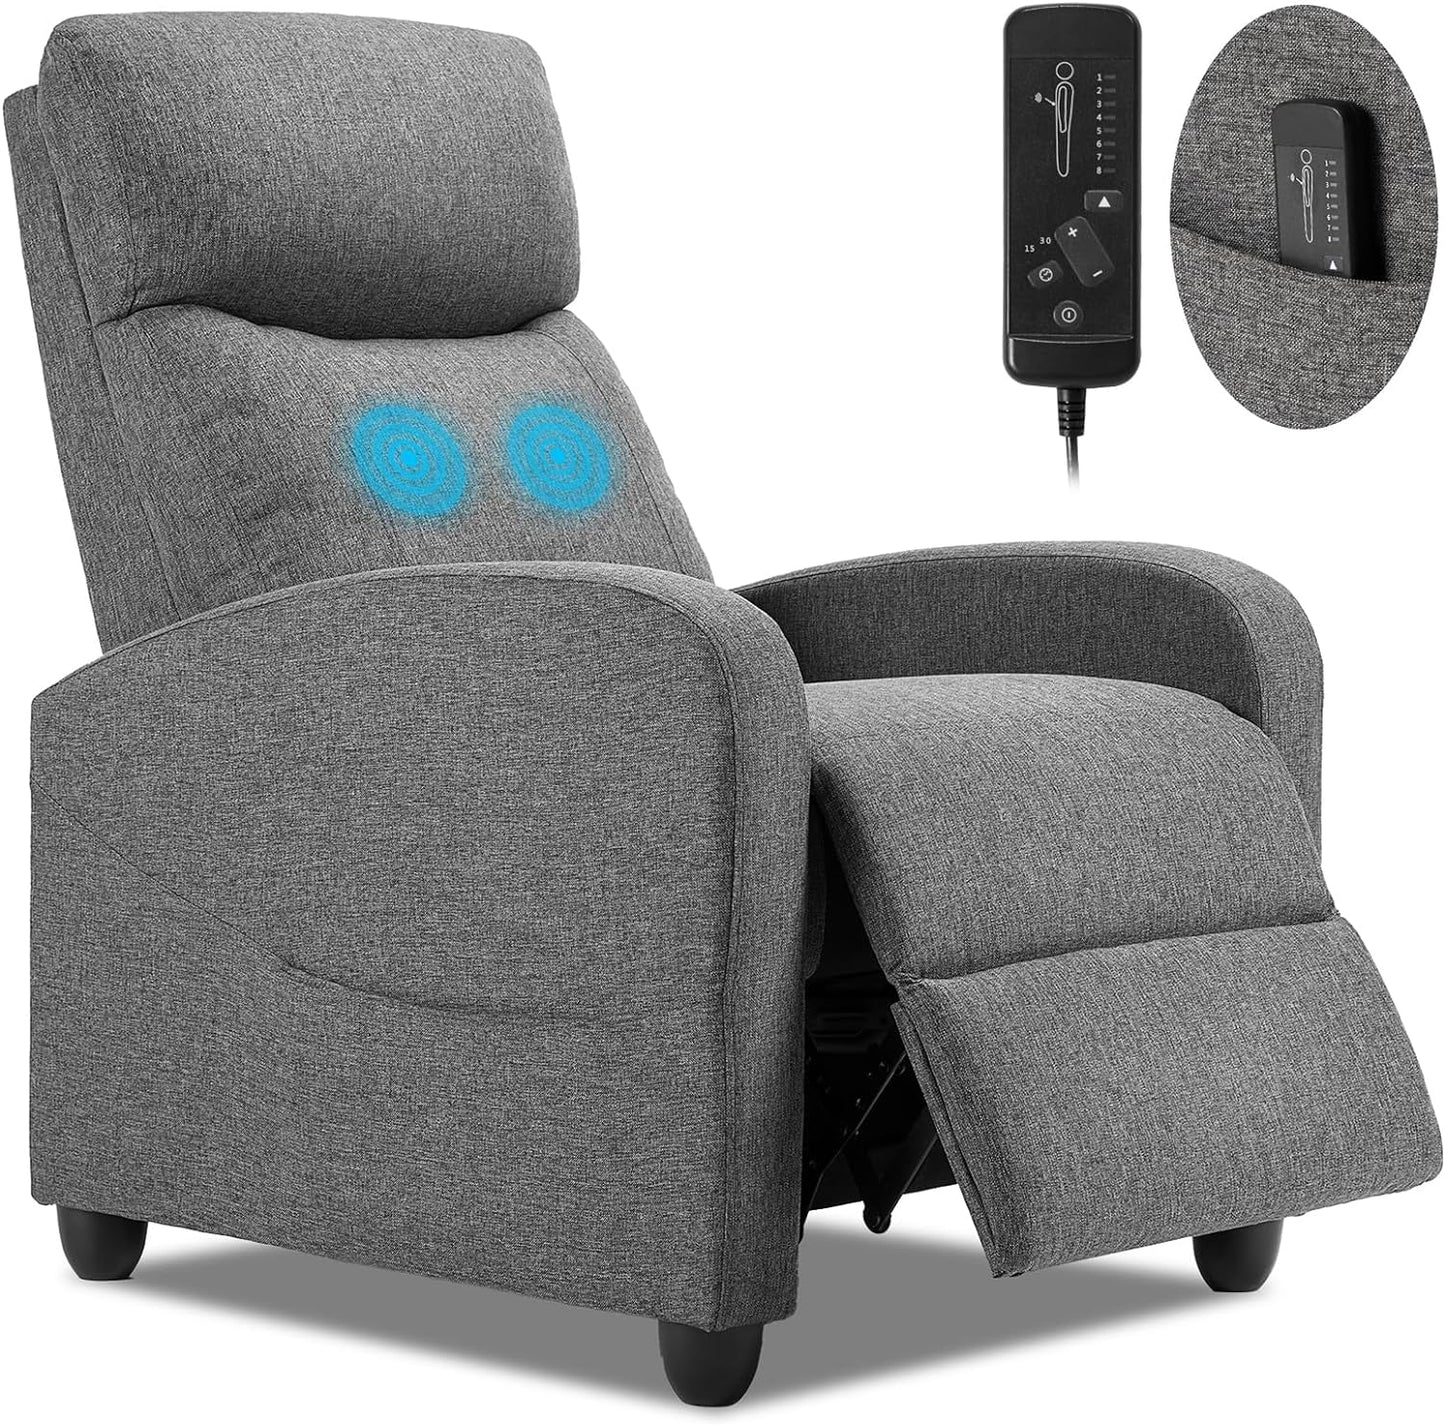 Recliner Chair Massage Reclining for Adults, Comfortable Fabric Recliner Sofa Adjustable Home Theater Seating Lounge with Padded Seat Backrest, Small Recliners for Living Room, Bedroom (Grey)